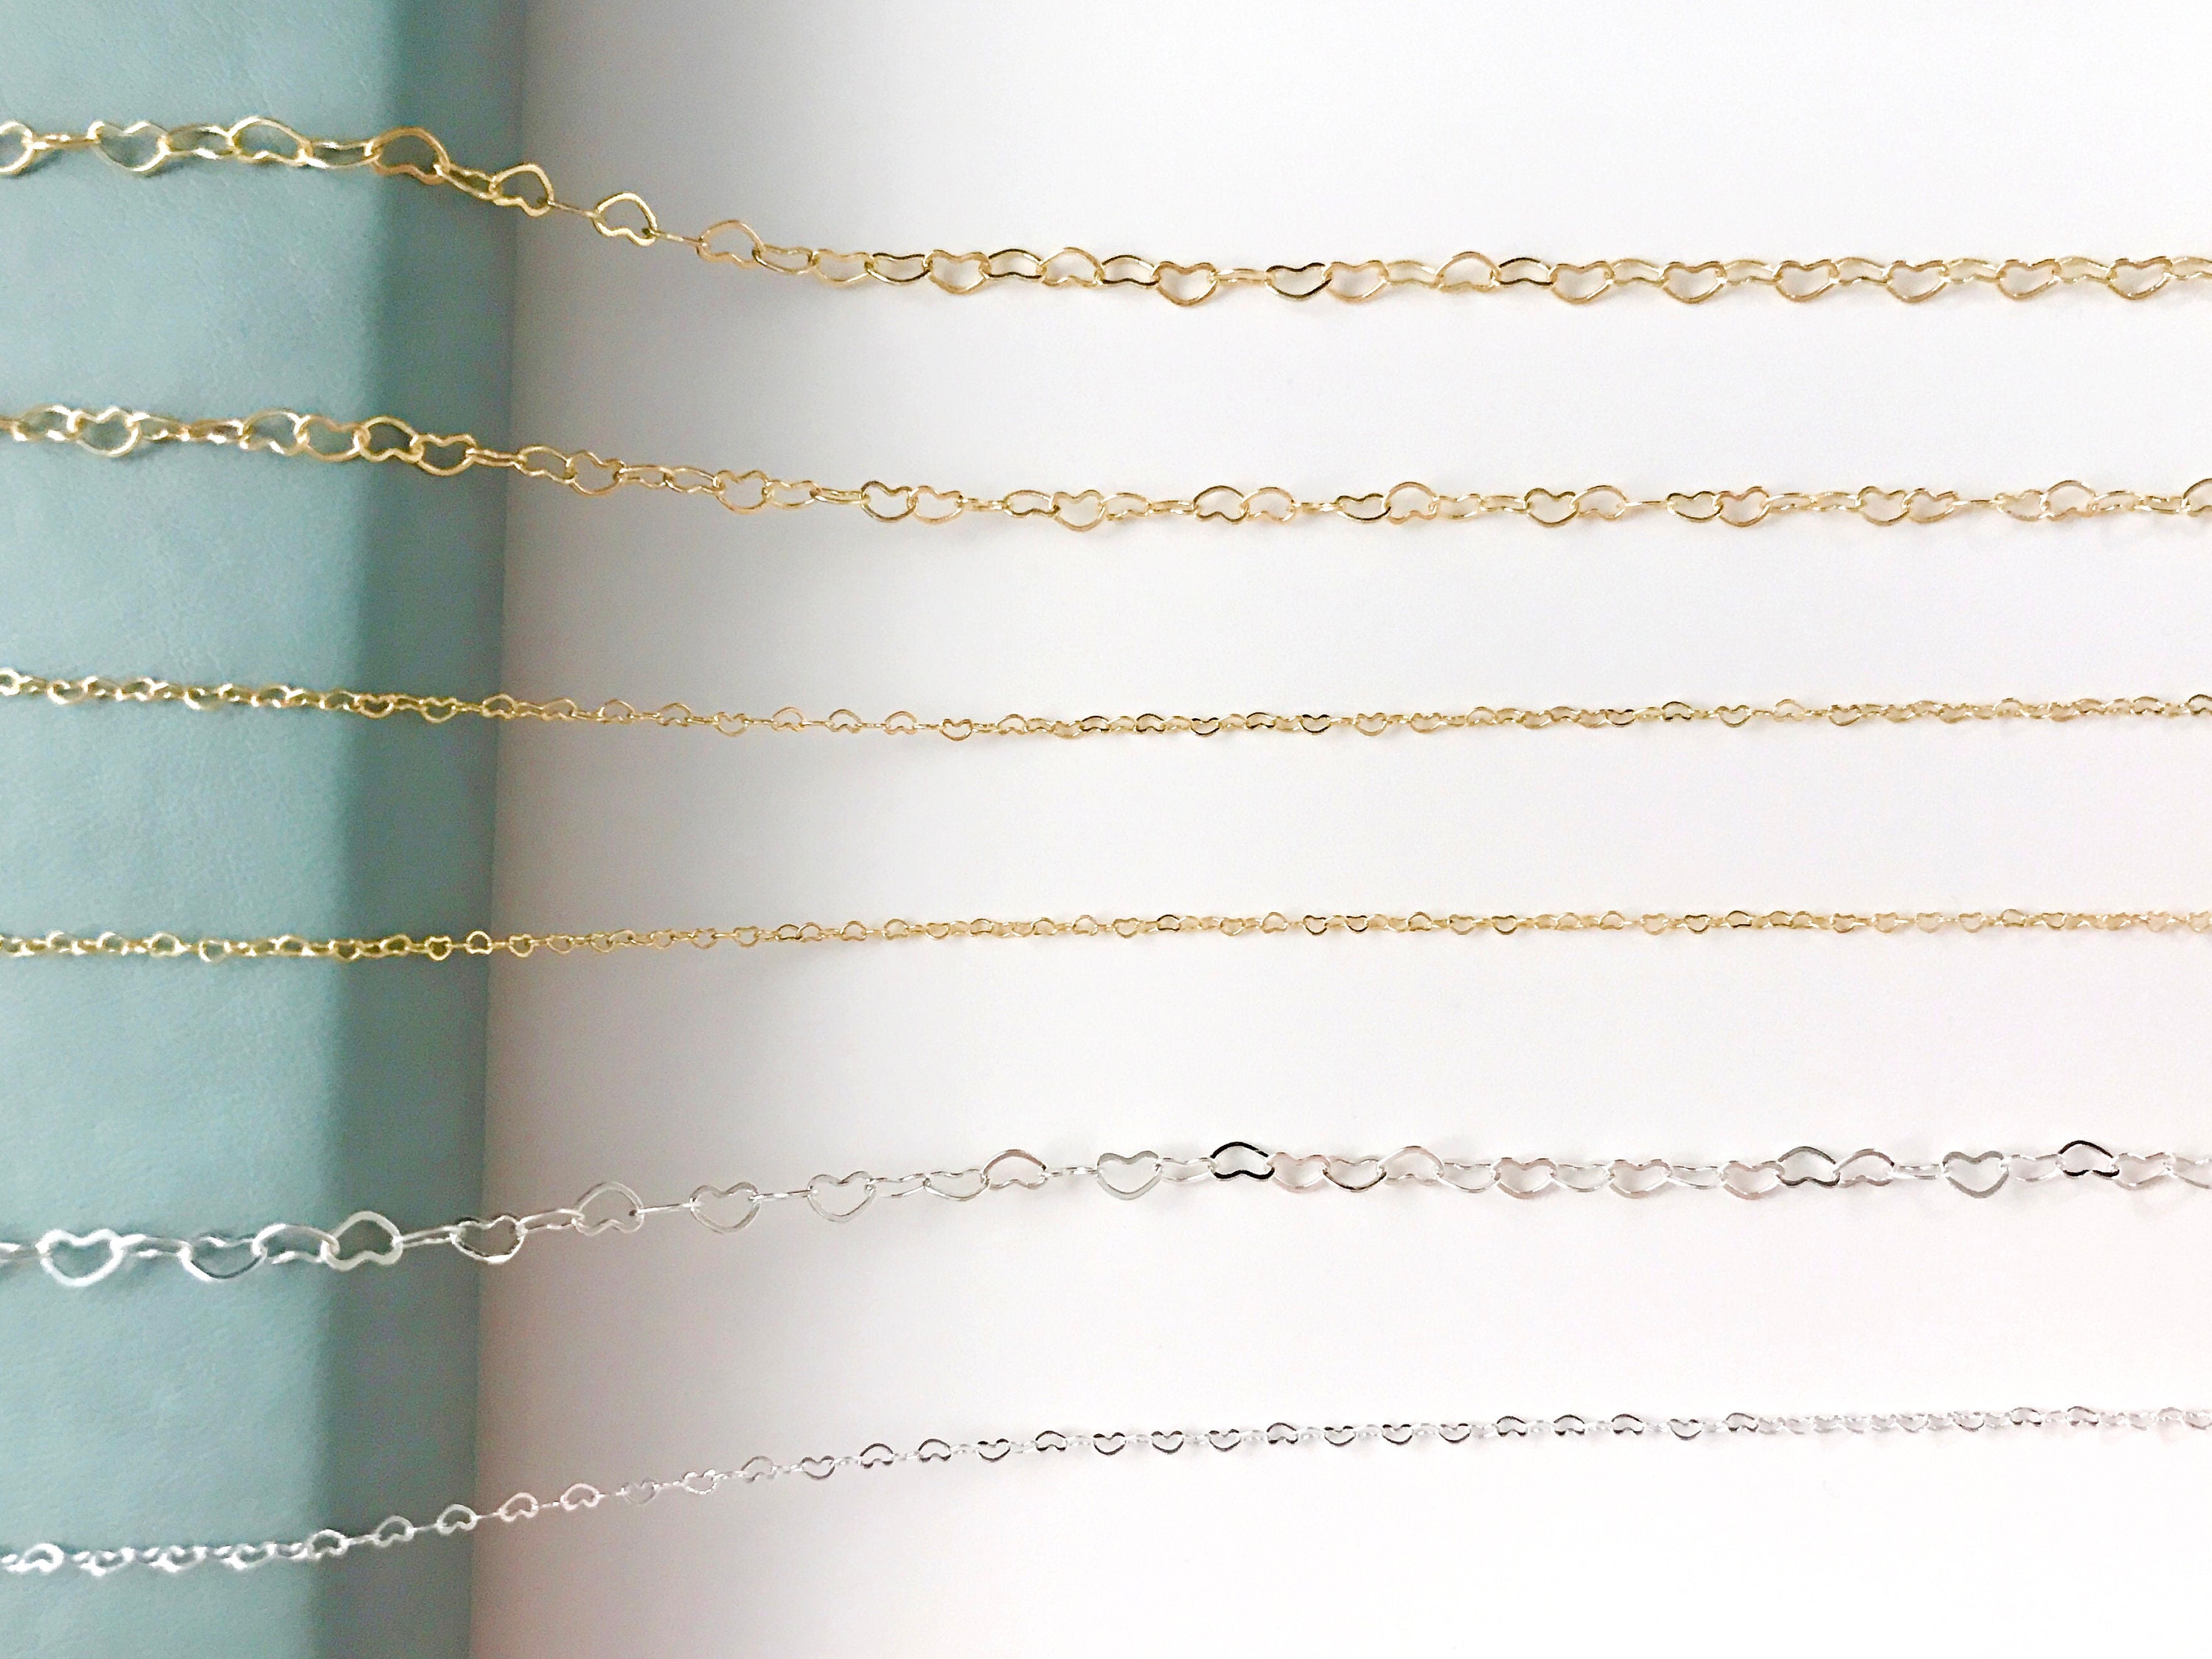 14K Gold Plated Chain Jewelry Chain Necklace Chain Choker Chain Stars  Hearts Leaves Jewelry Making Chains 